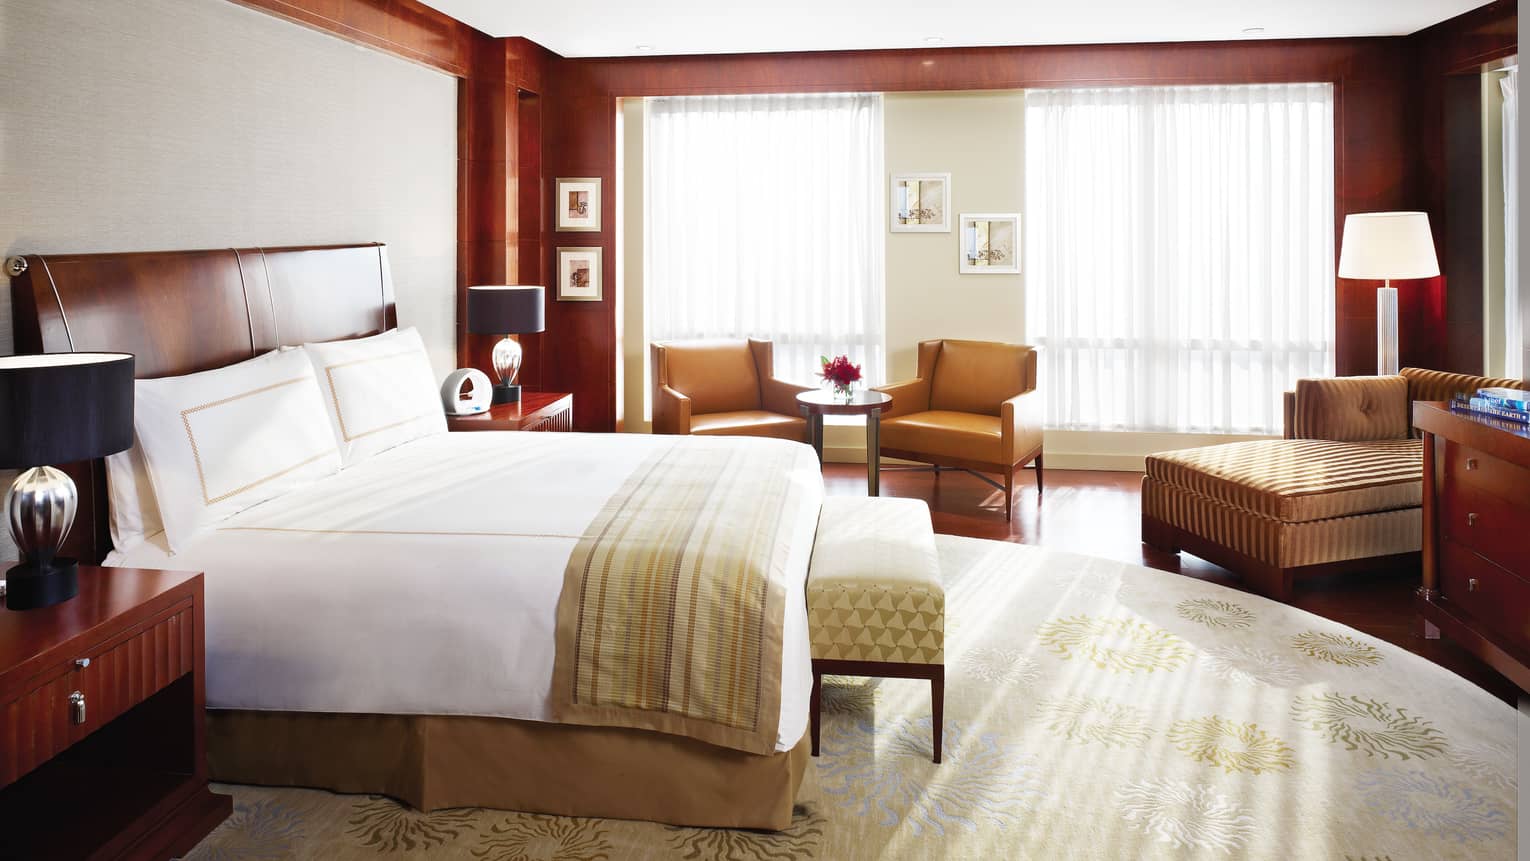 Presidential Suite bed, striped blanket, bench, brown leather armchairs and chaise by window